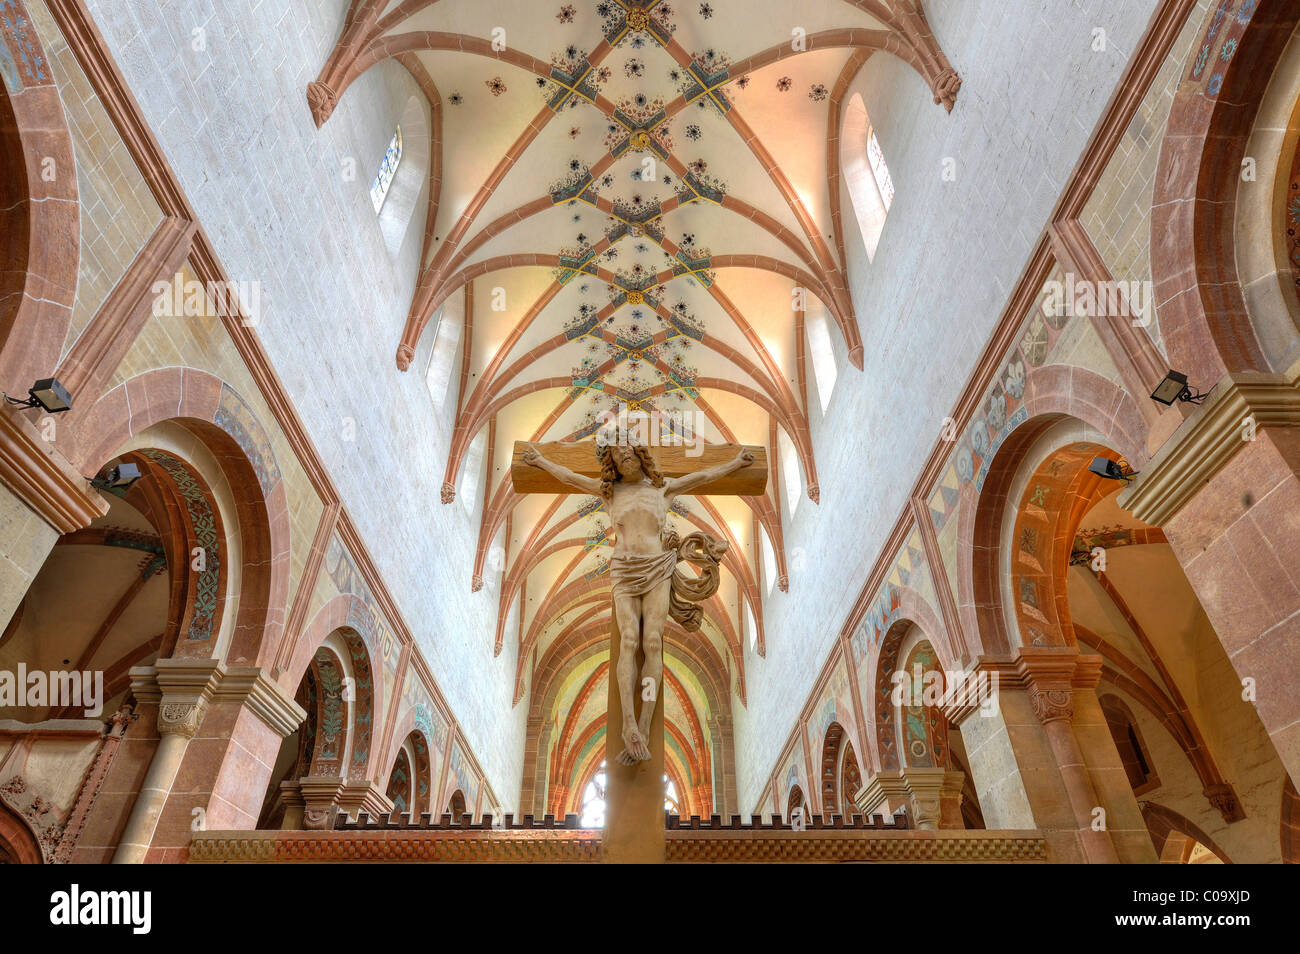 Interior, crucifix in the nave of the Lay Church, rib vaulting, Maulbronn Monastery, Cistercian Abbey Stock Photo